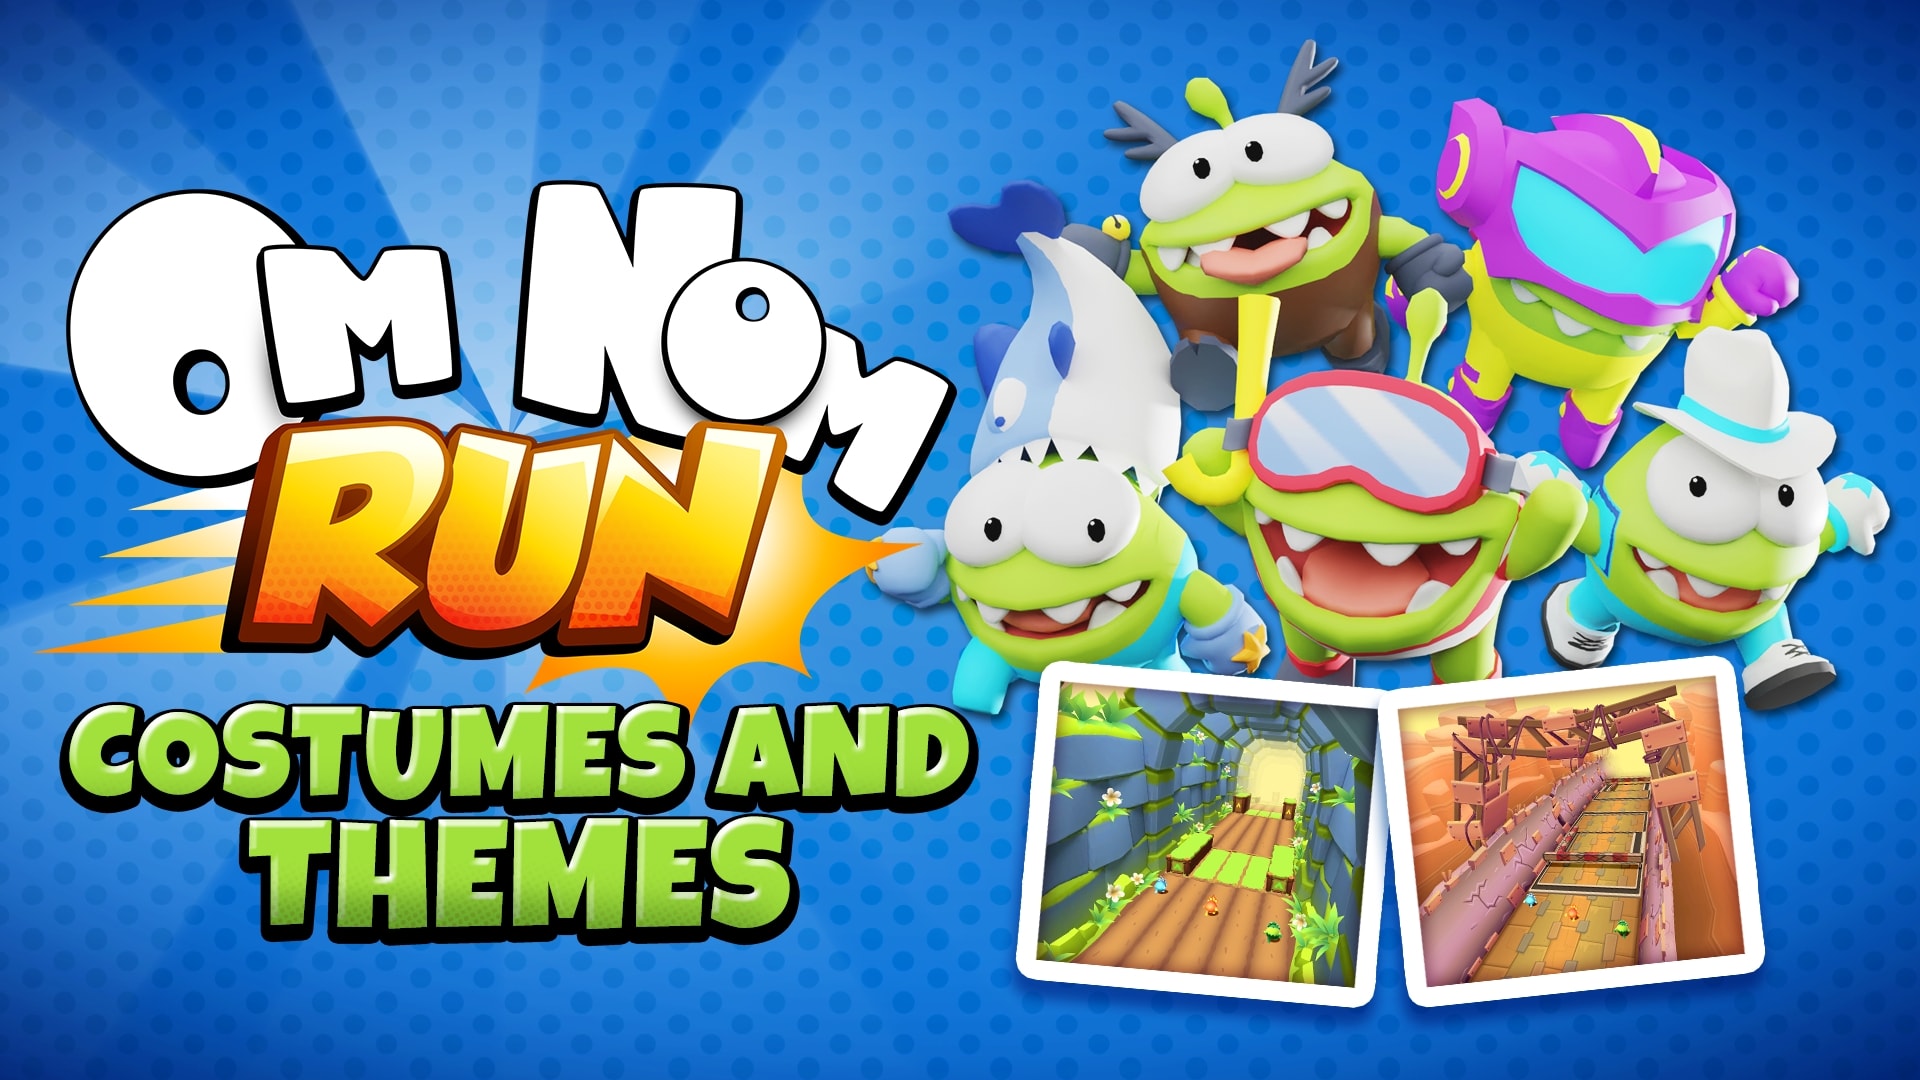 Om Nom: Run - Costumes and Themes